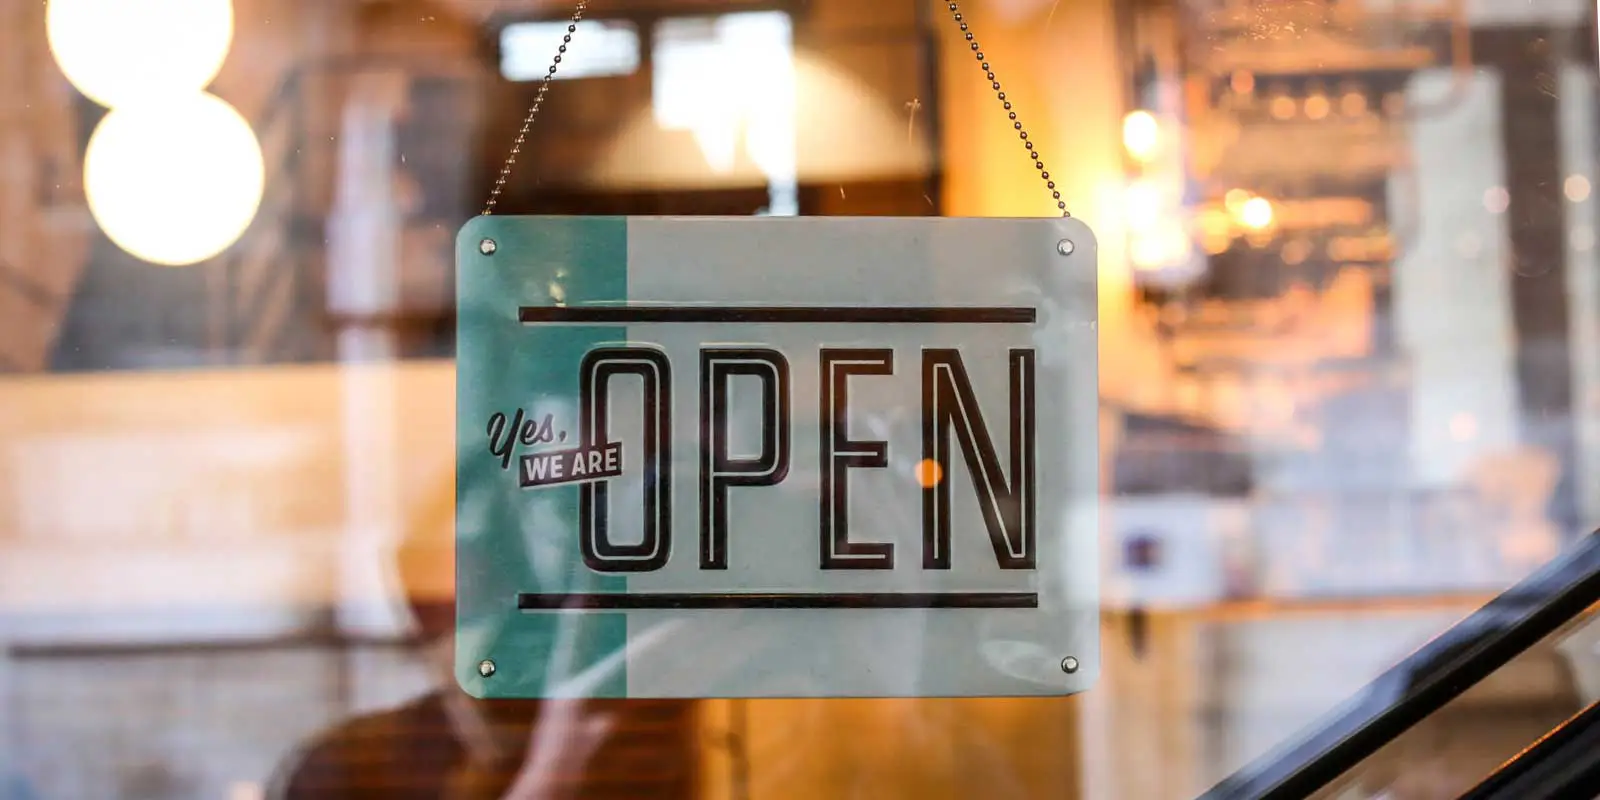 Close up photo of a shop sign saying "Yes, we are open."